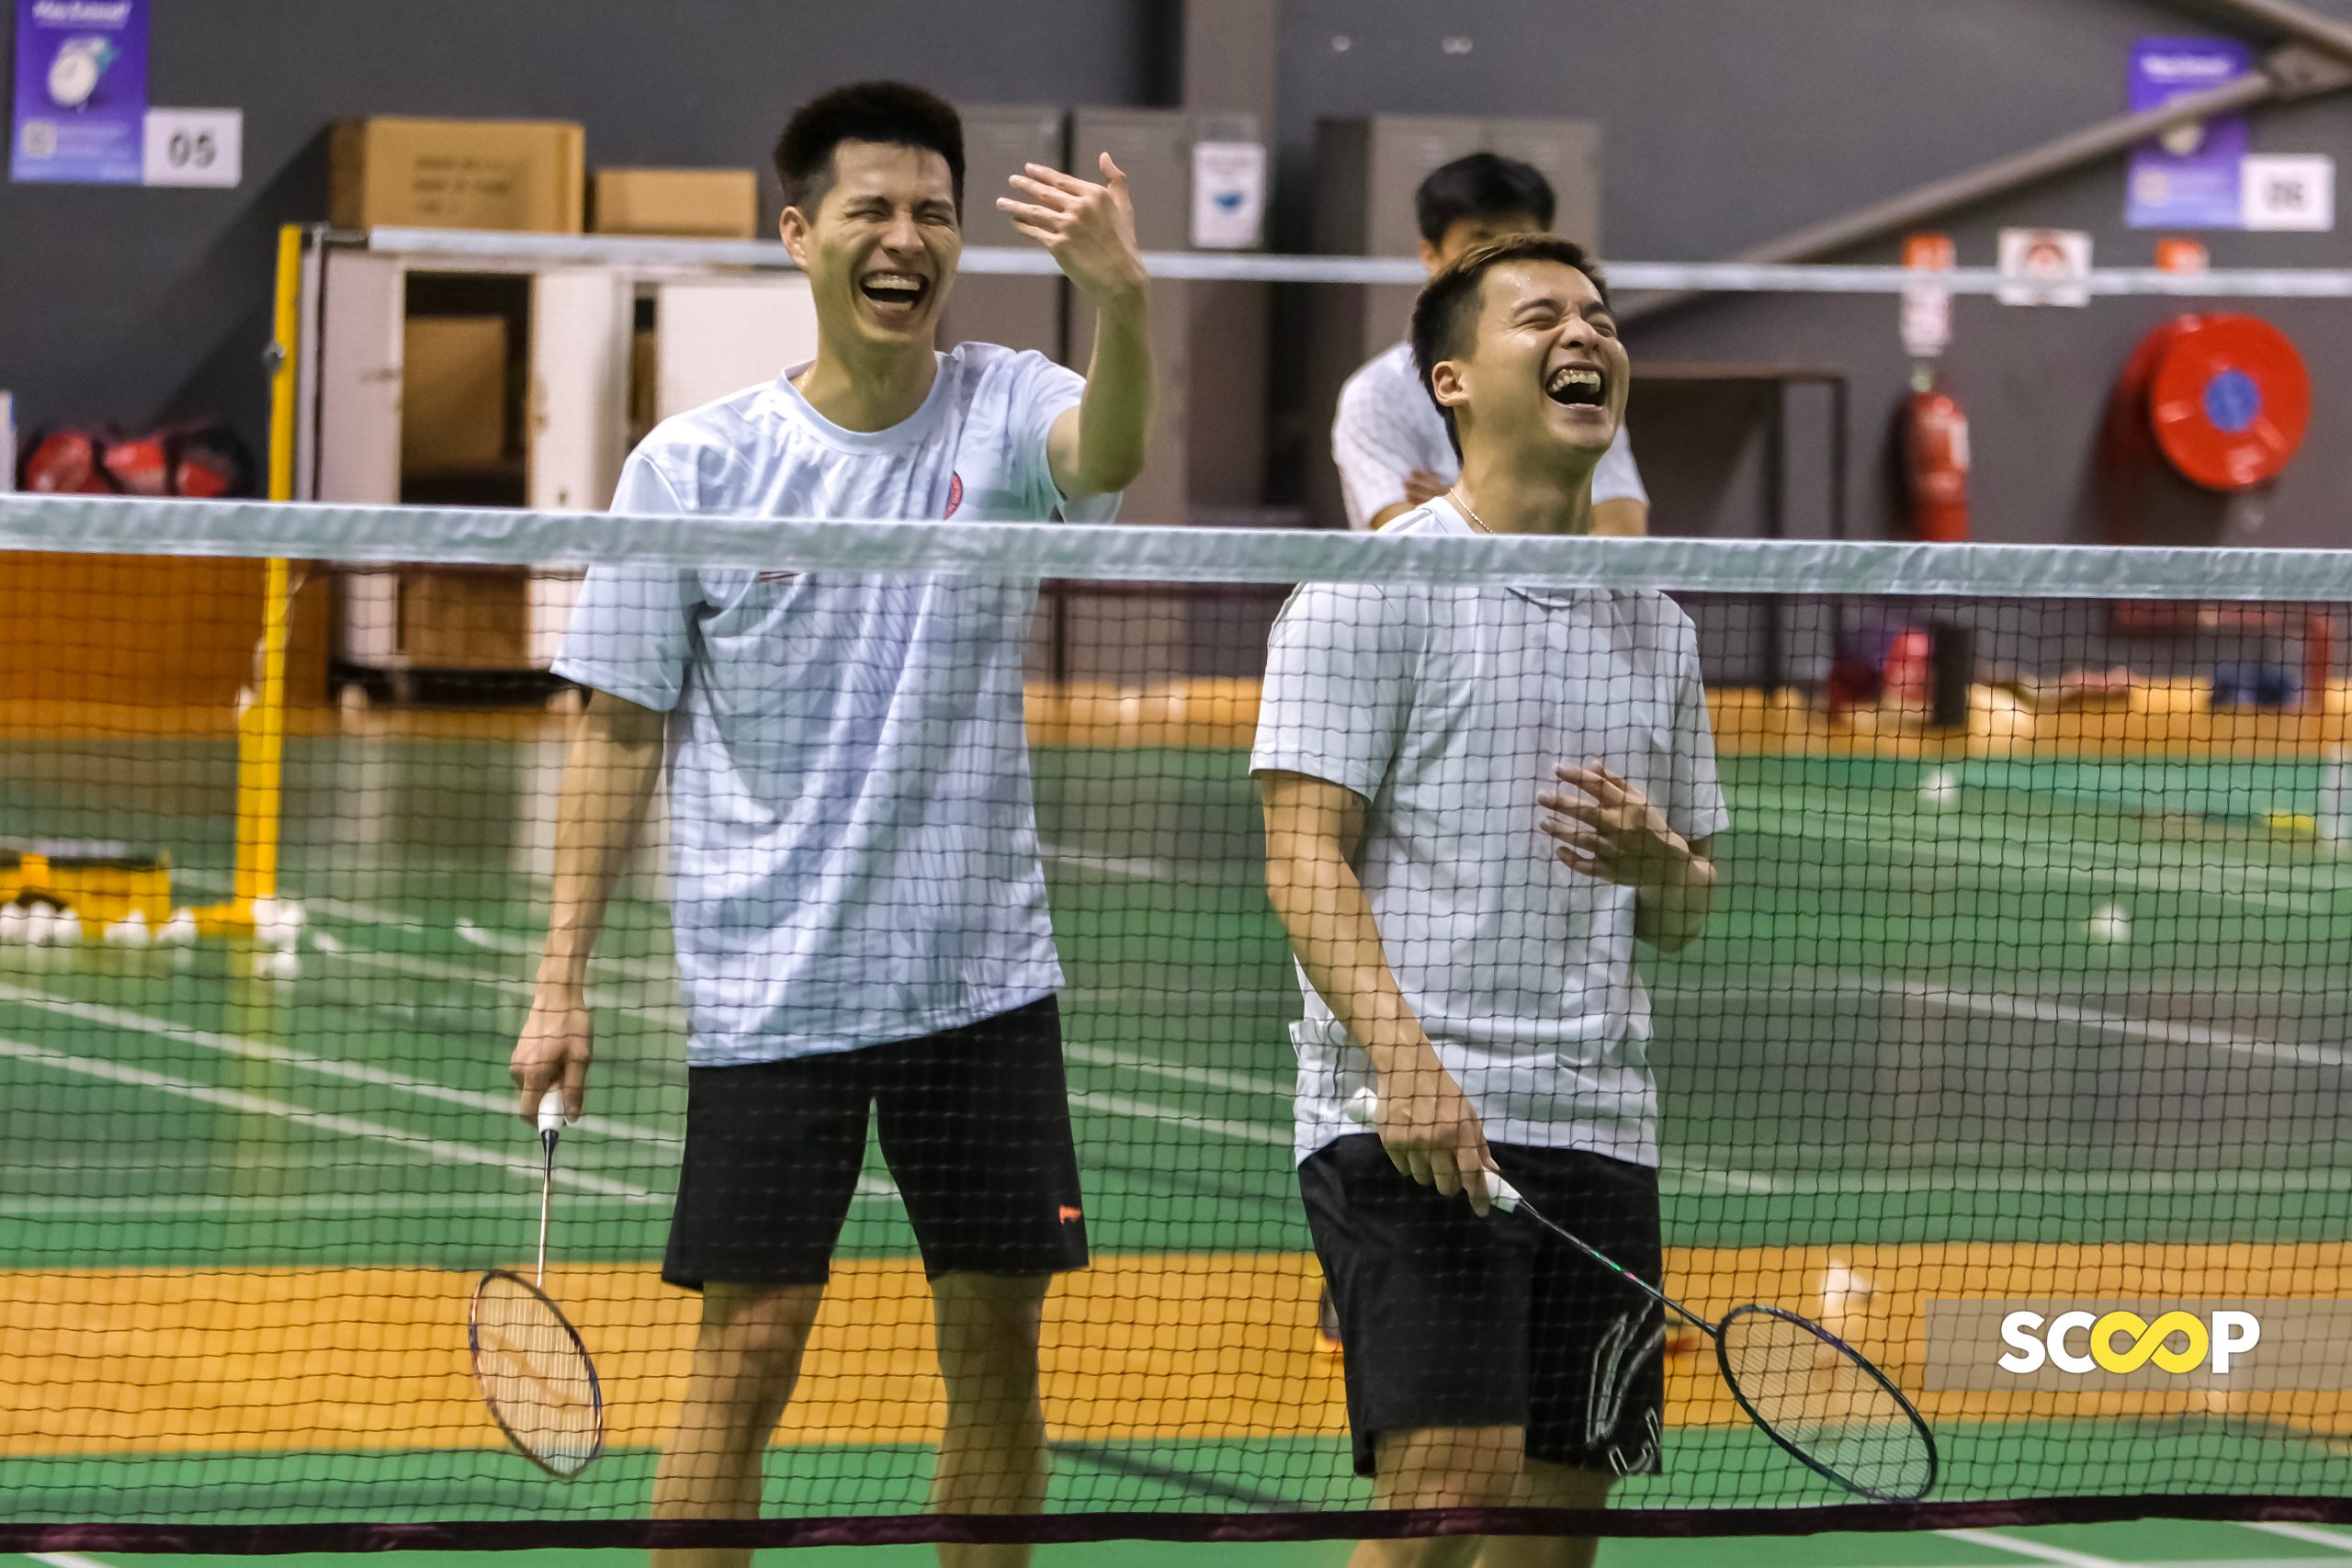 Ong Yew Sin unfazed by fatigue ahead of Asiad